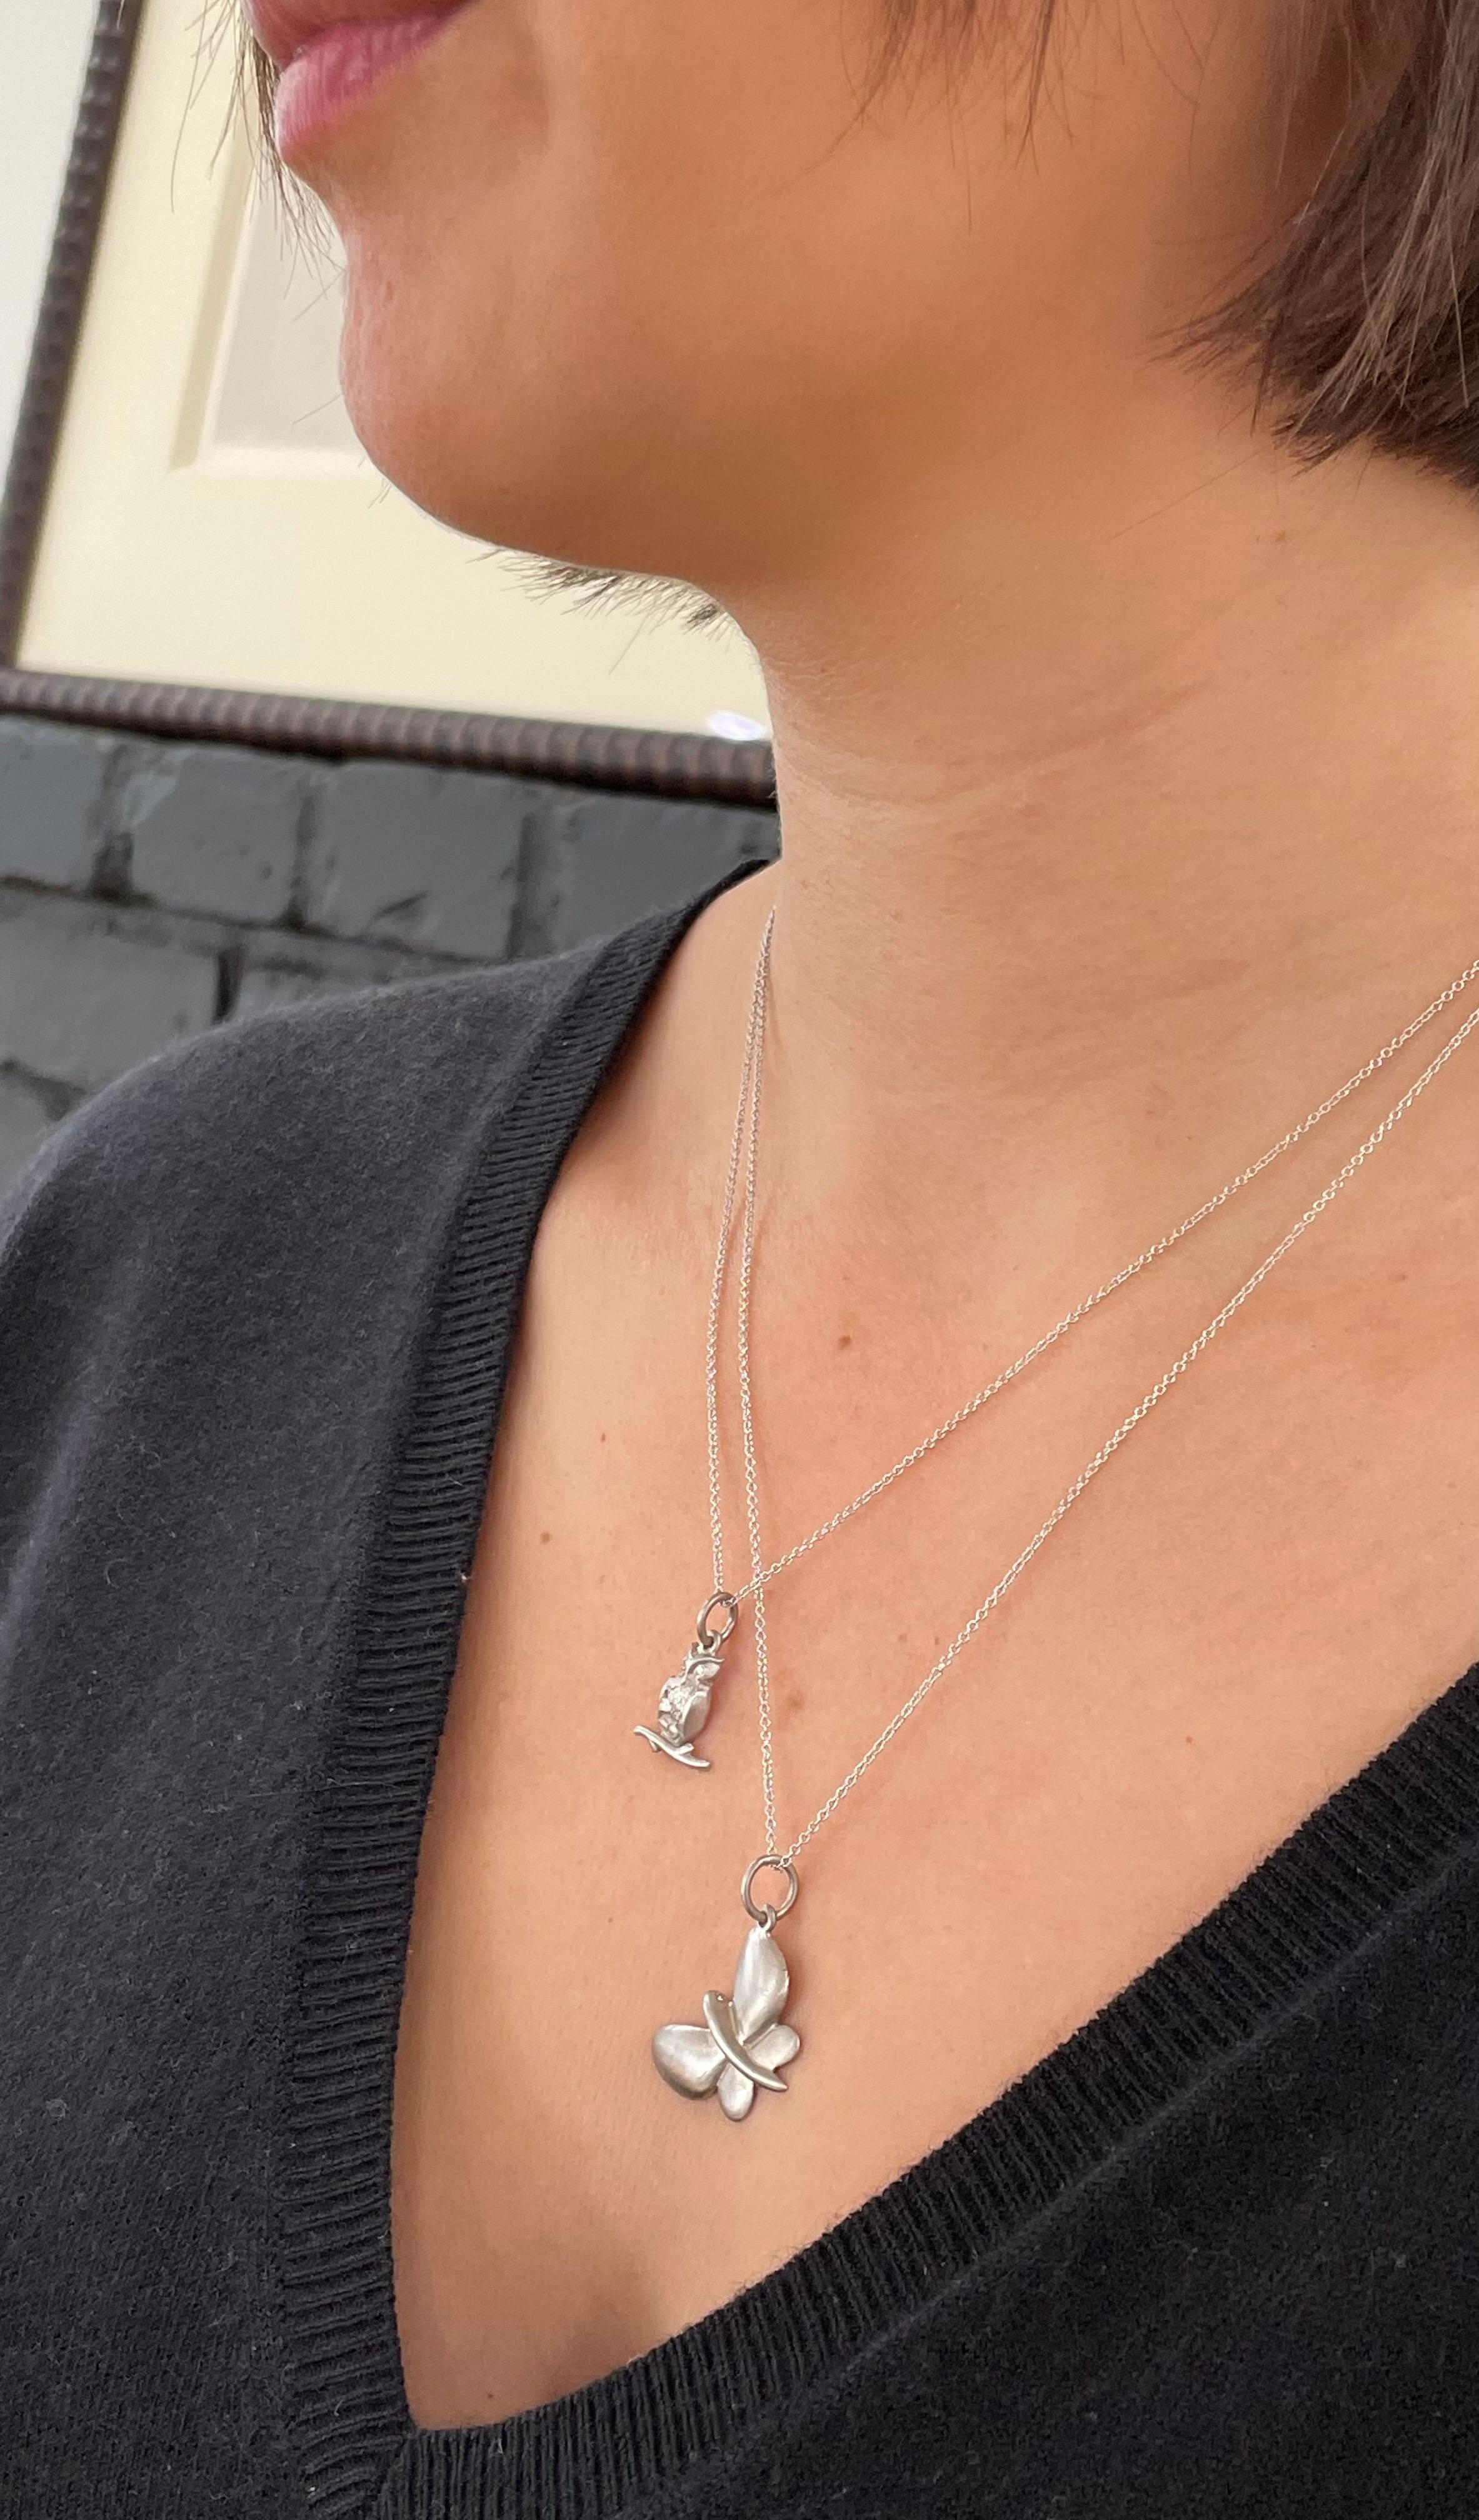 Symbolizing wisdom, truth, and knowledge, Faye Kim's truly charming Platinum Owl necklace is complete with diamond eyes.

Owl Length x Width: .6